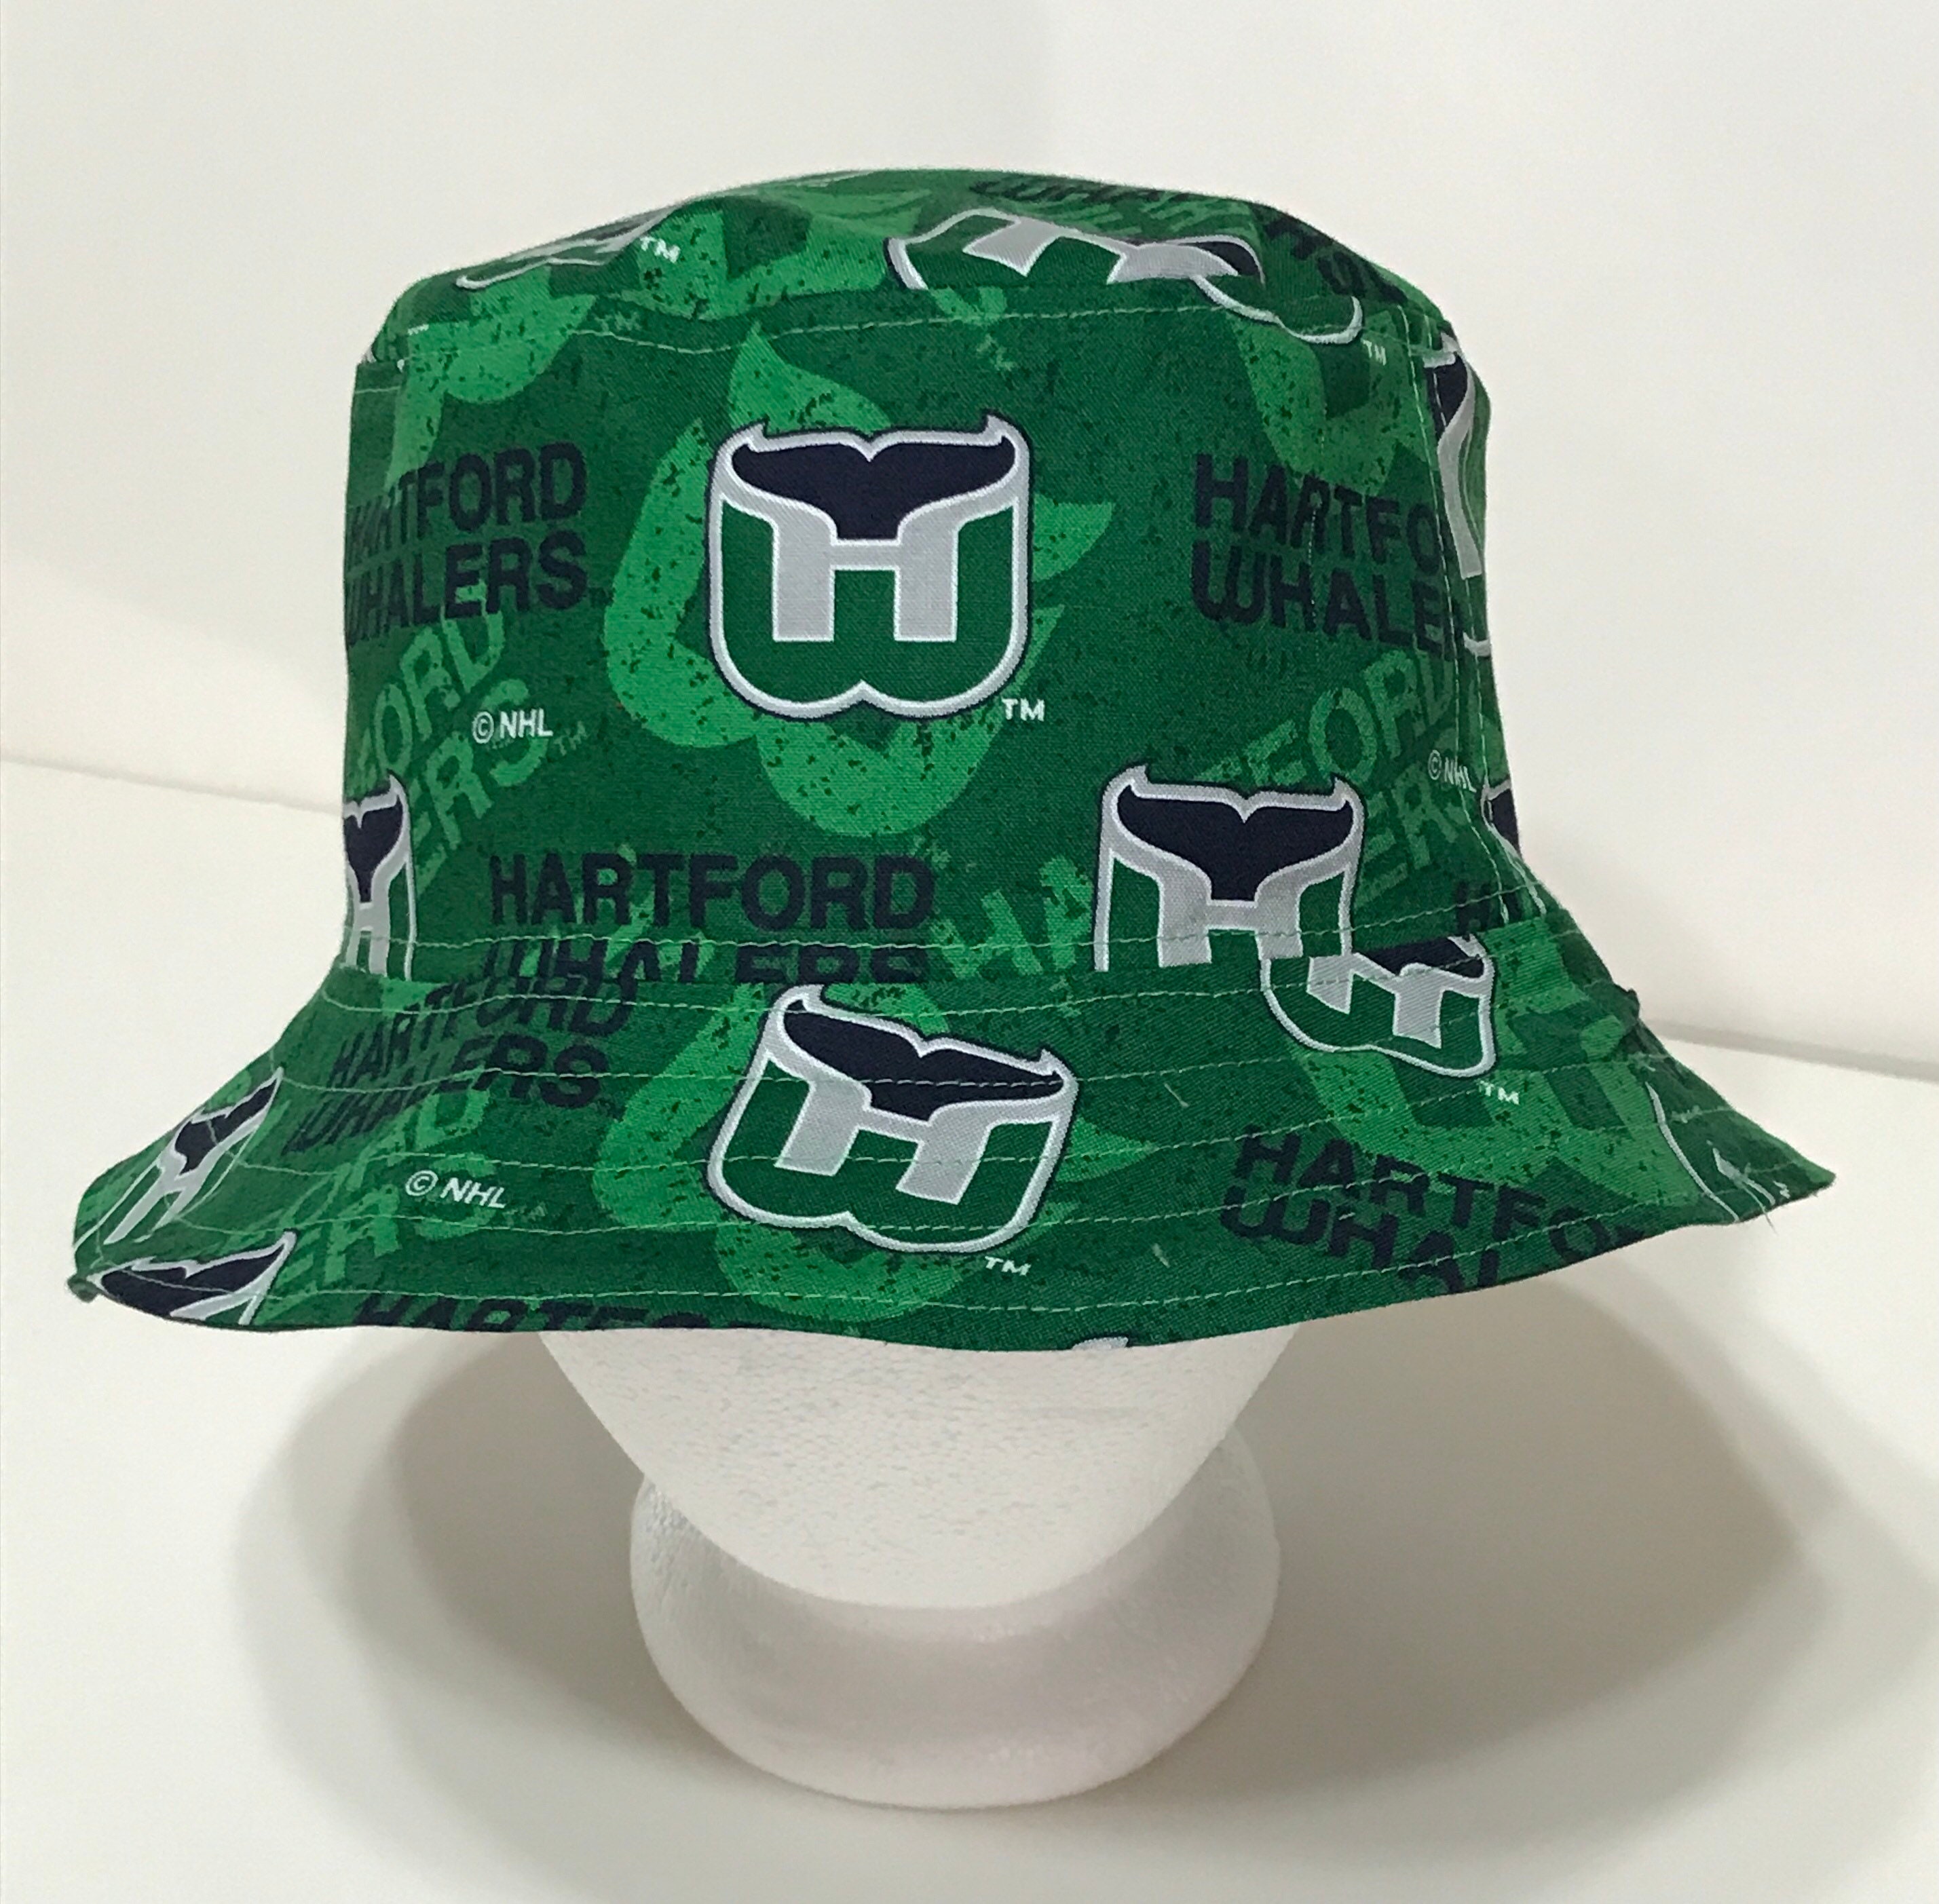 Hartford Whalers Vintage Logo Classic Cap for Sale by Rodriguez156